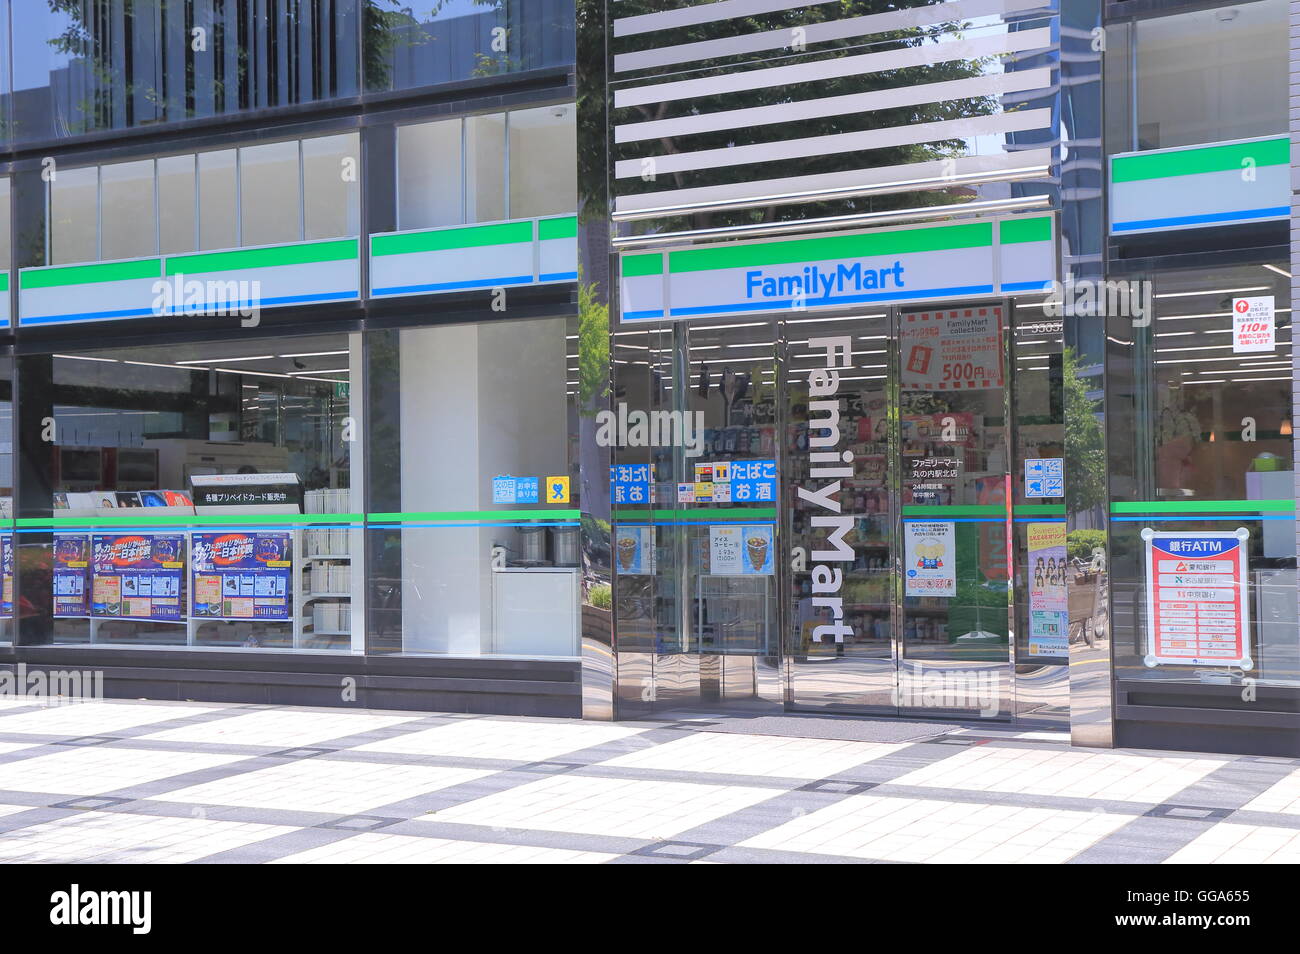 FamilyMart convenience store the third largest Japanese convenience store franchise chain i  Japan first opened in 1981. Stock Photo